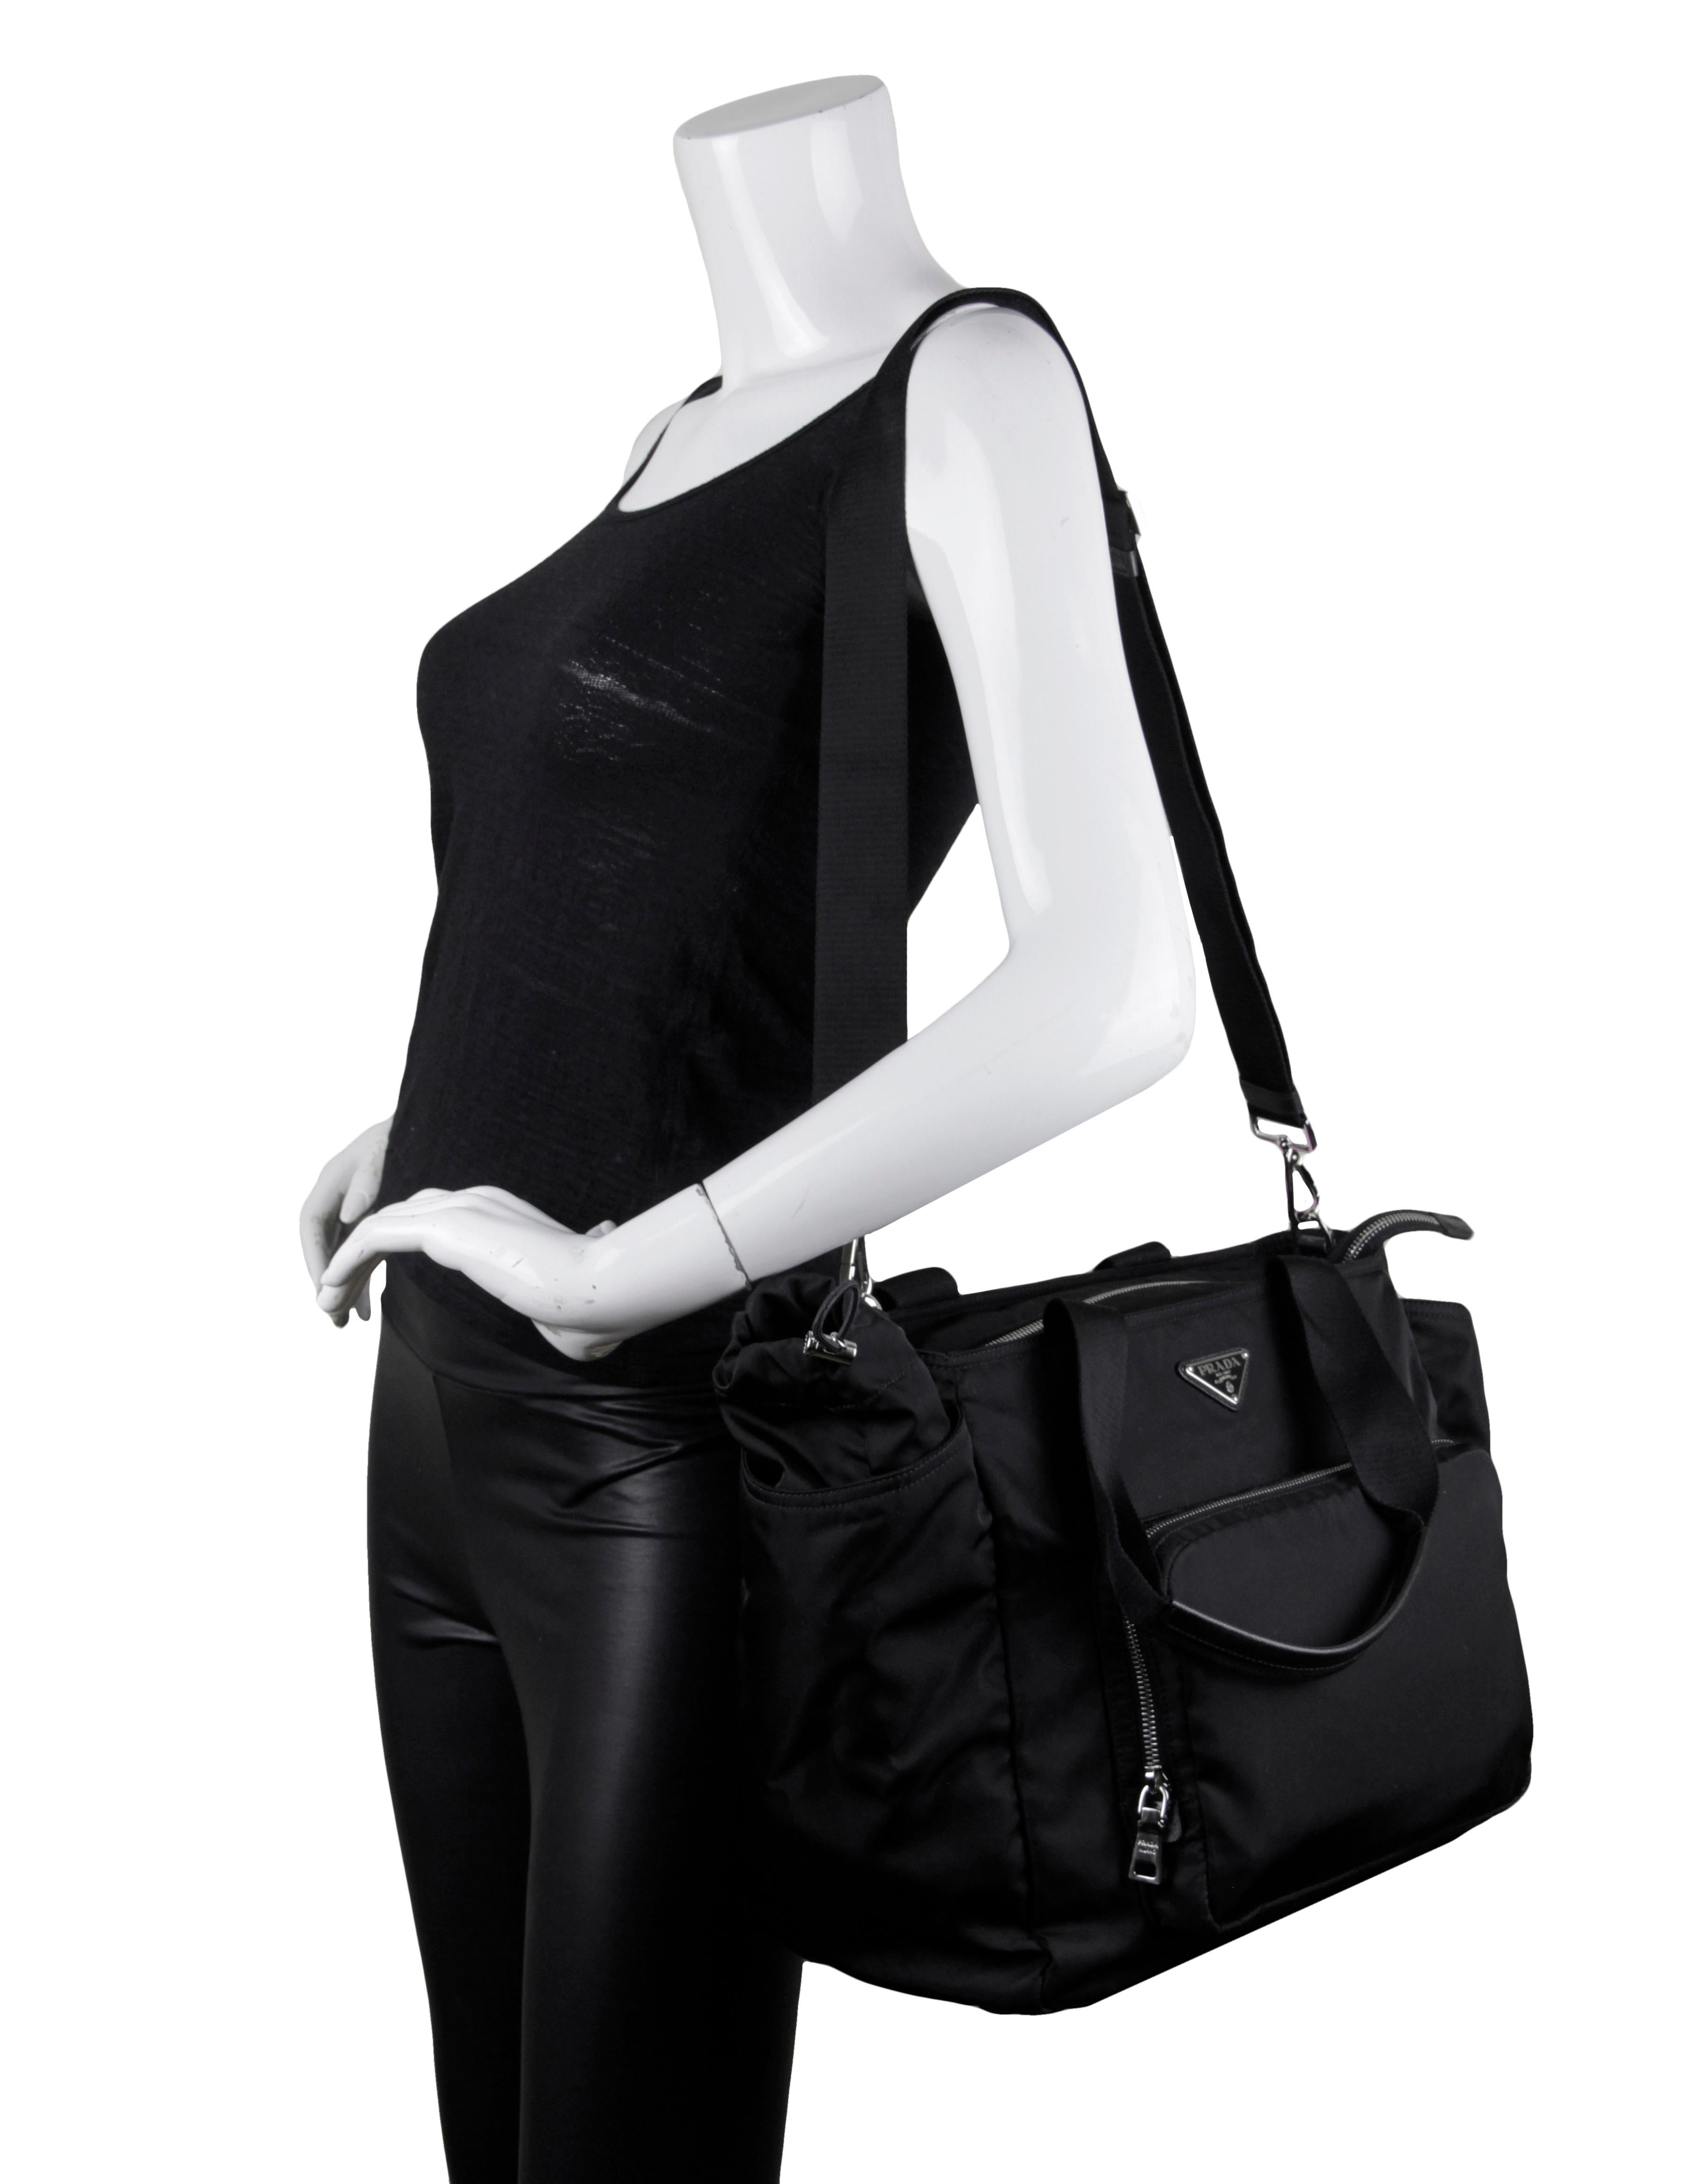 Prada BR4102 Black Tessuto Nylon Baby Diaper Tote Bag

Made In: Italy
Color: Black
Hardware: Silvertone
Materials: Nylon with canvas straps and leather trim
Lining: Black logo textile
Closure/Opening: Zip top
Exterior Pockets: Front zip pocket holds